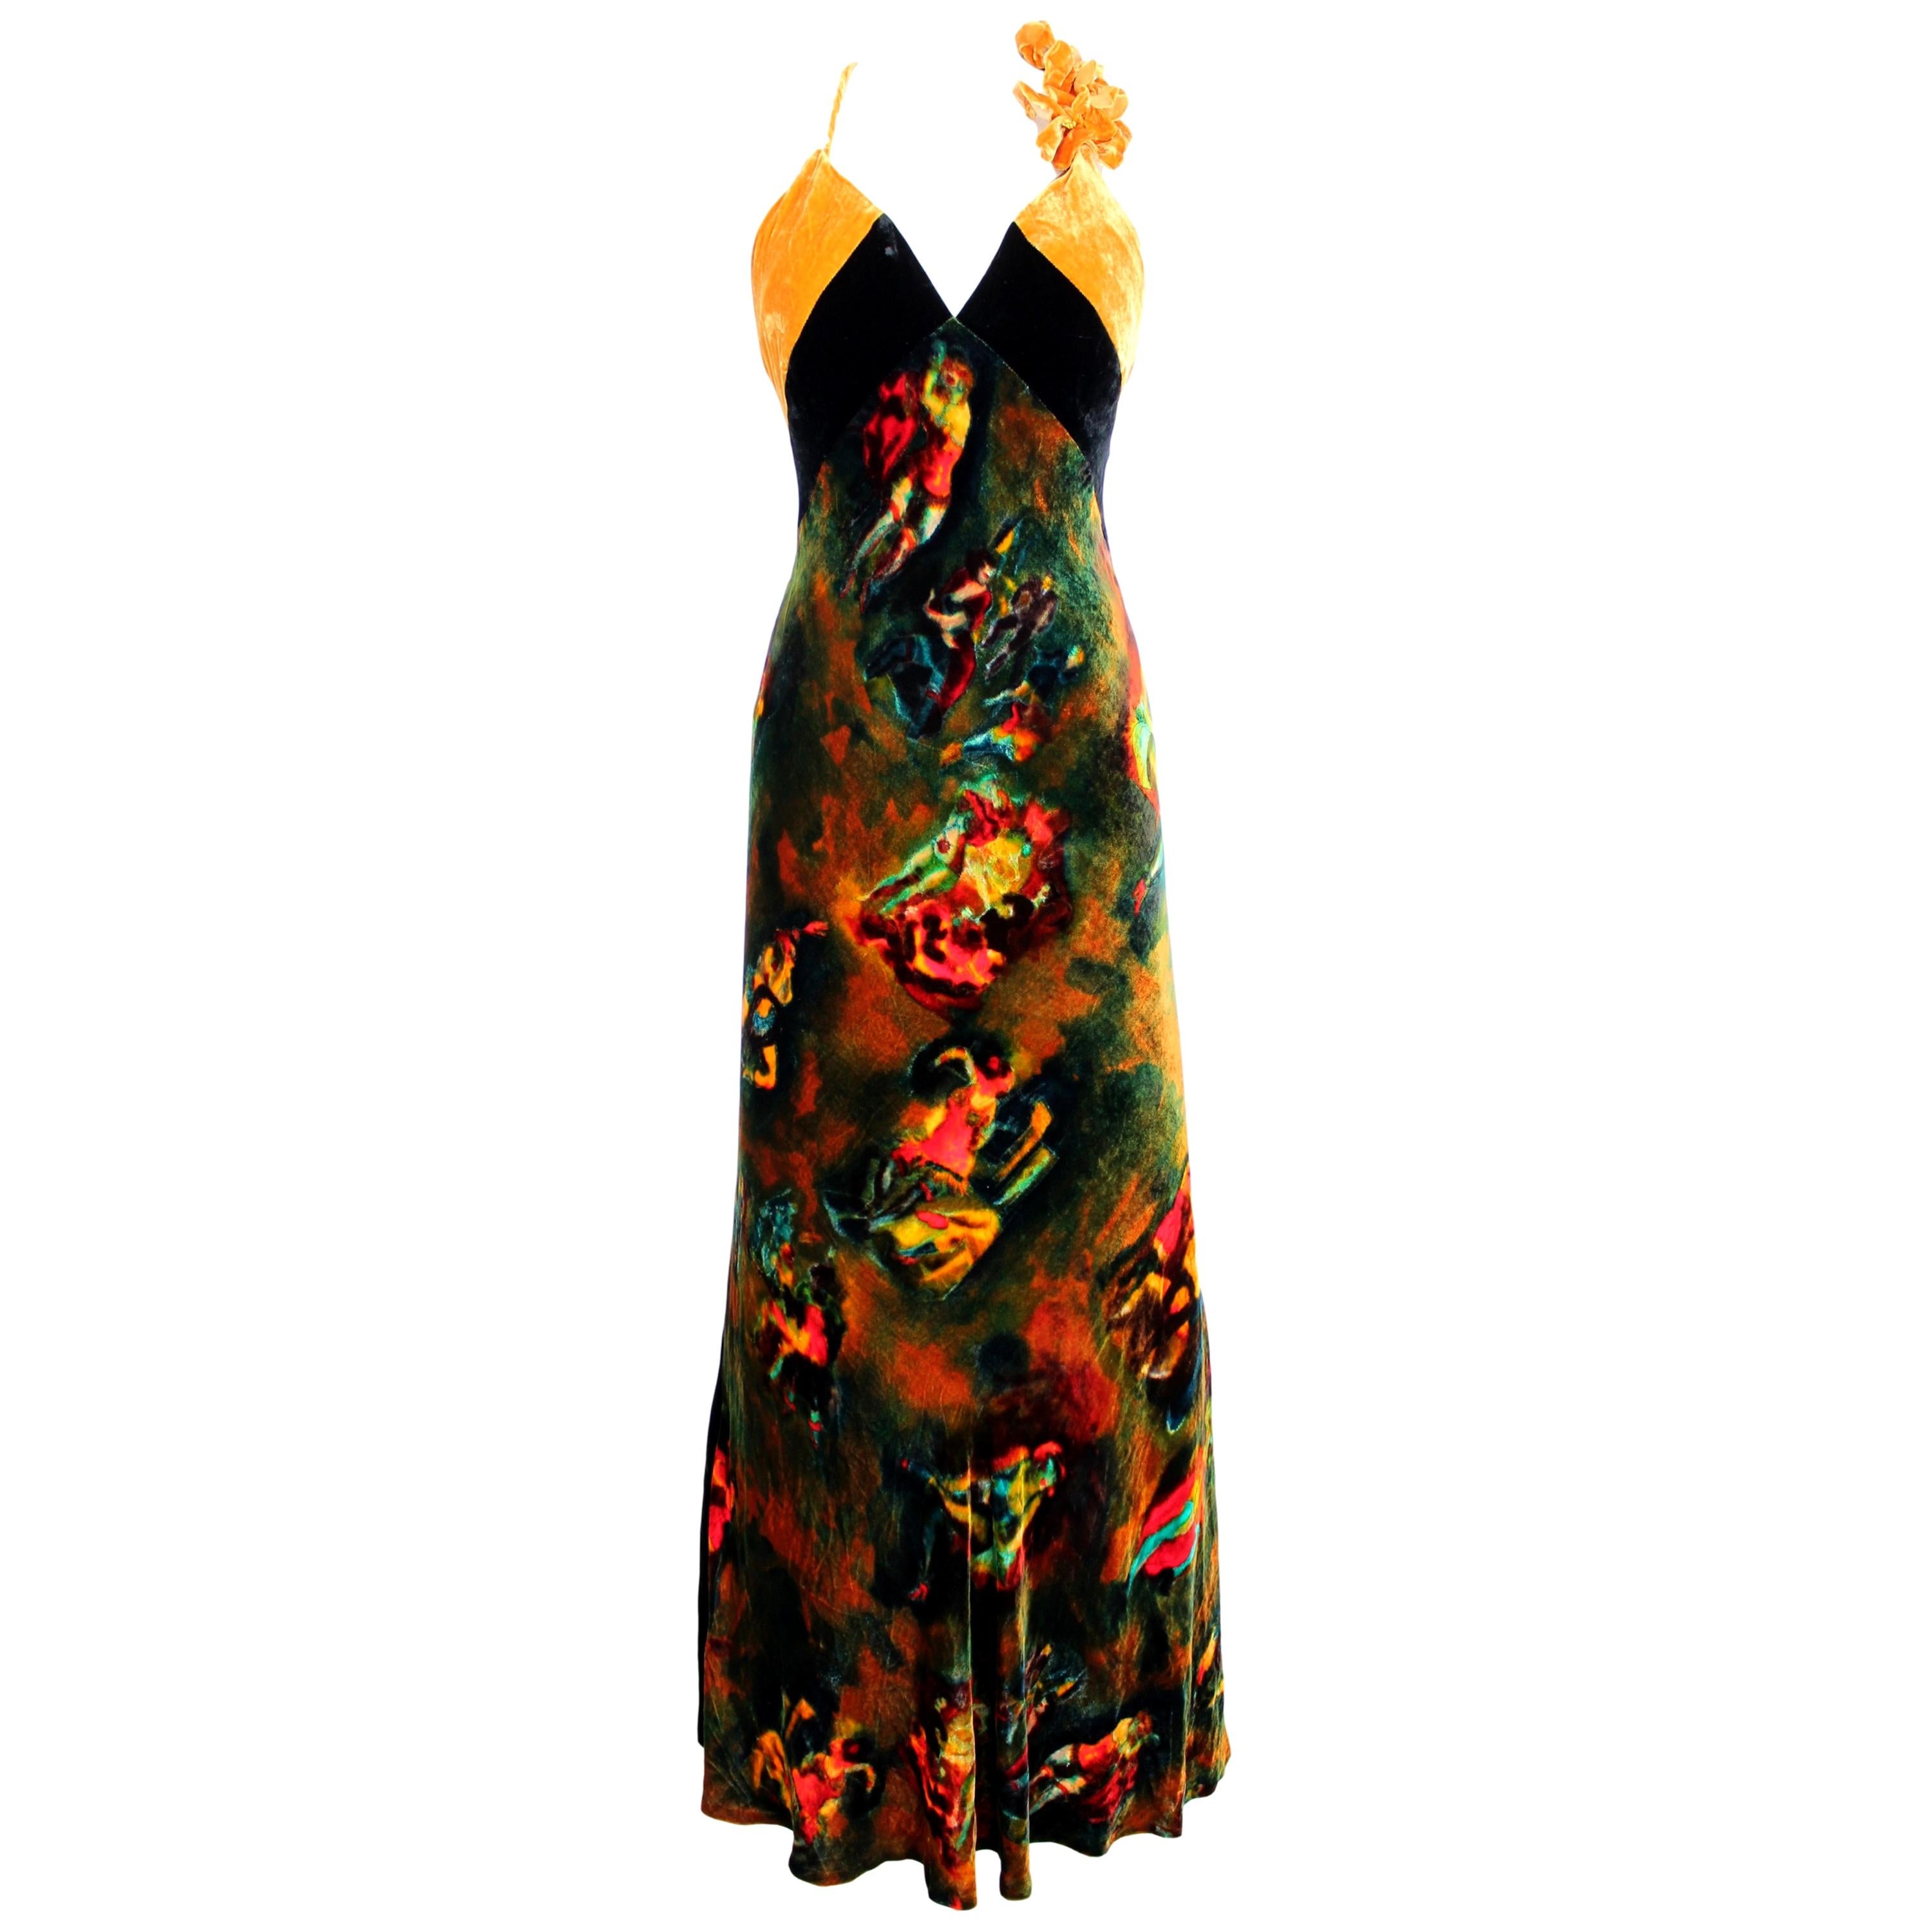 This beautiful Jean Paul Gaultier long dress is a must-have for any fashion lover. The dress features a stunning Japanese print in yellow and brown tones, making it perfect for any special occasion. Made from a luxurious blend of 82% rayon and 18%